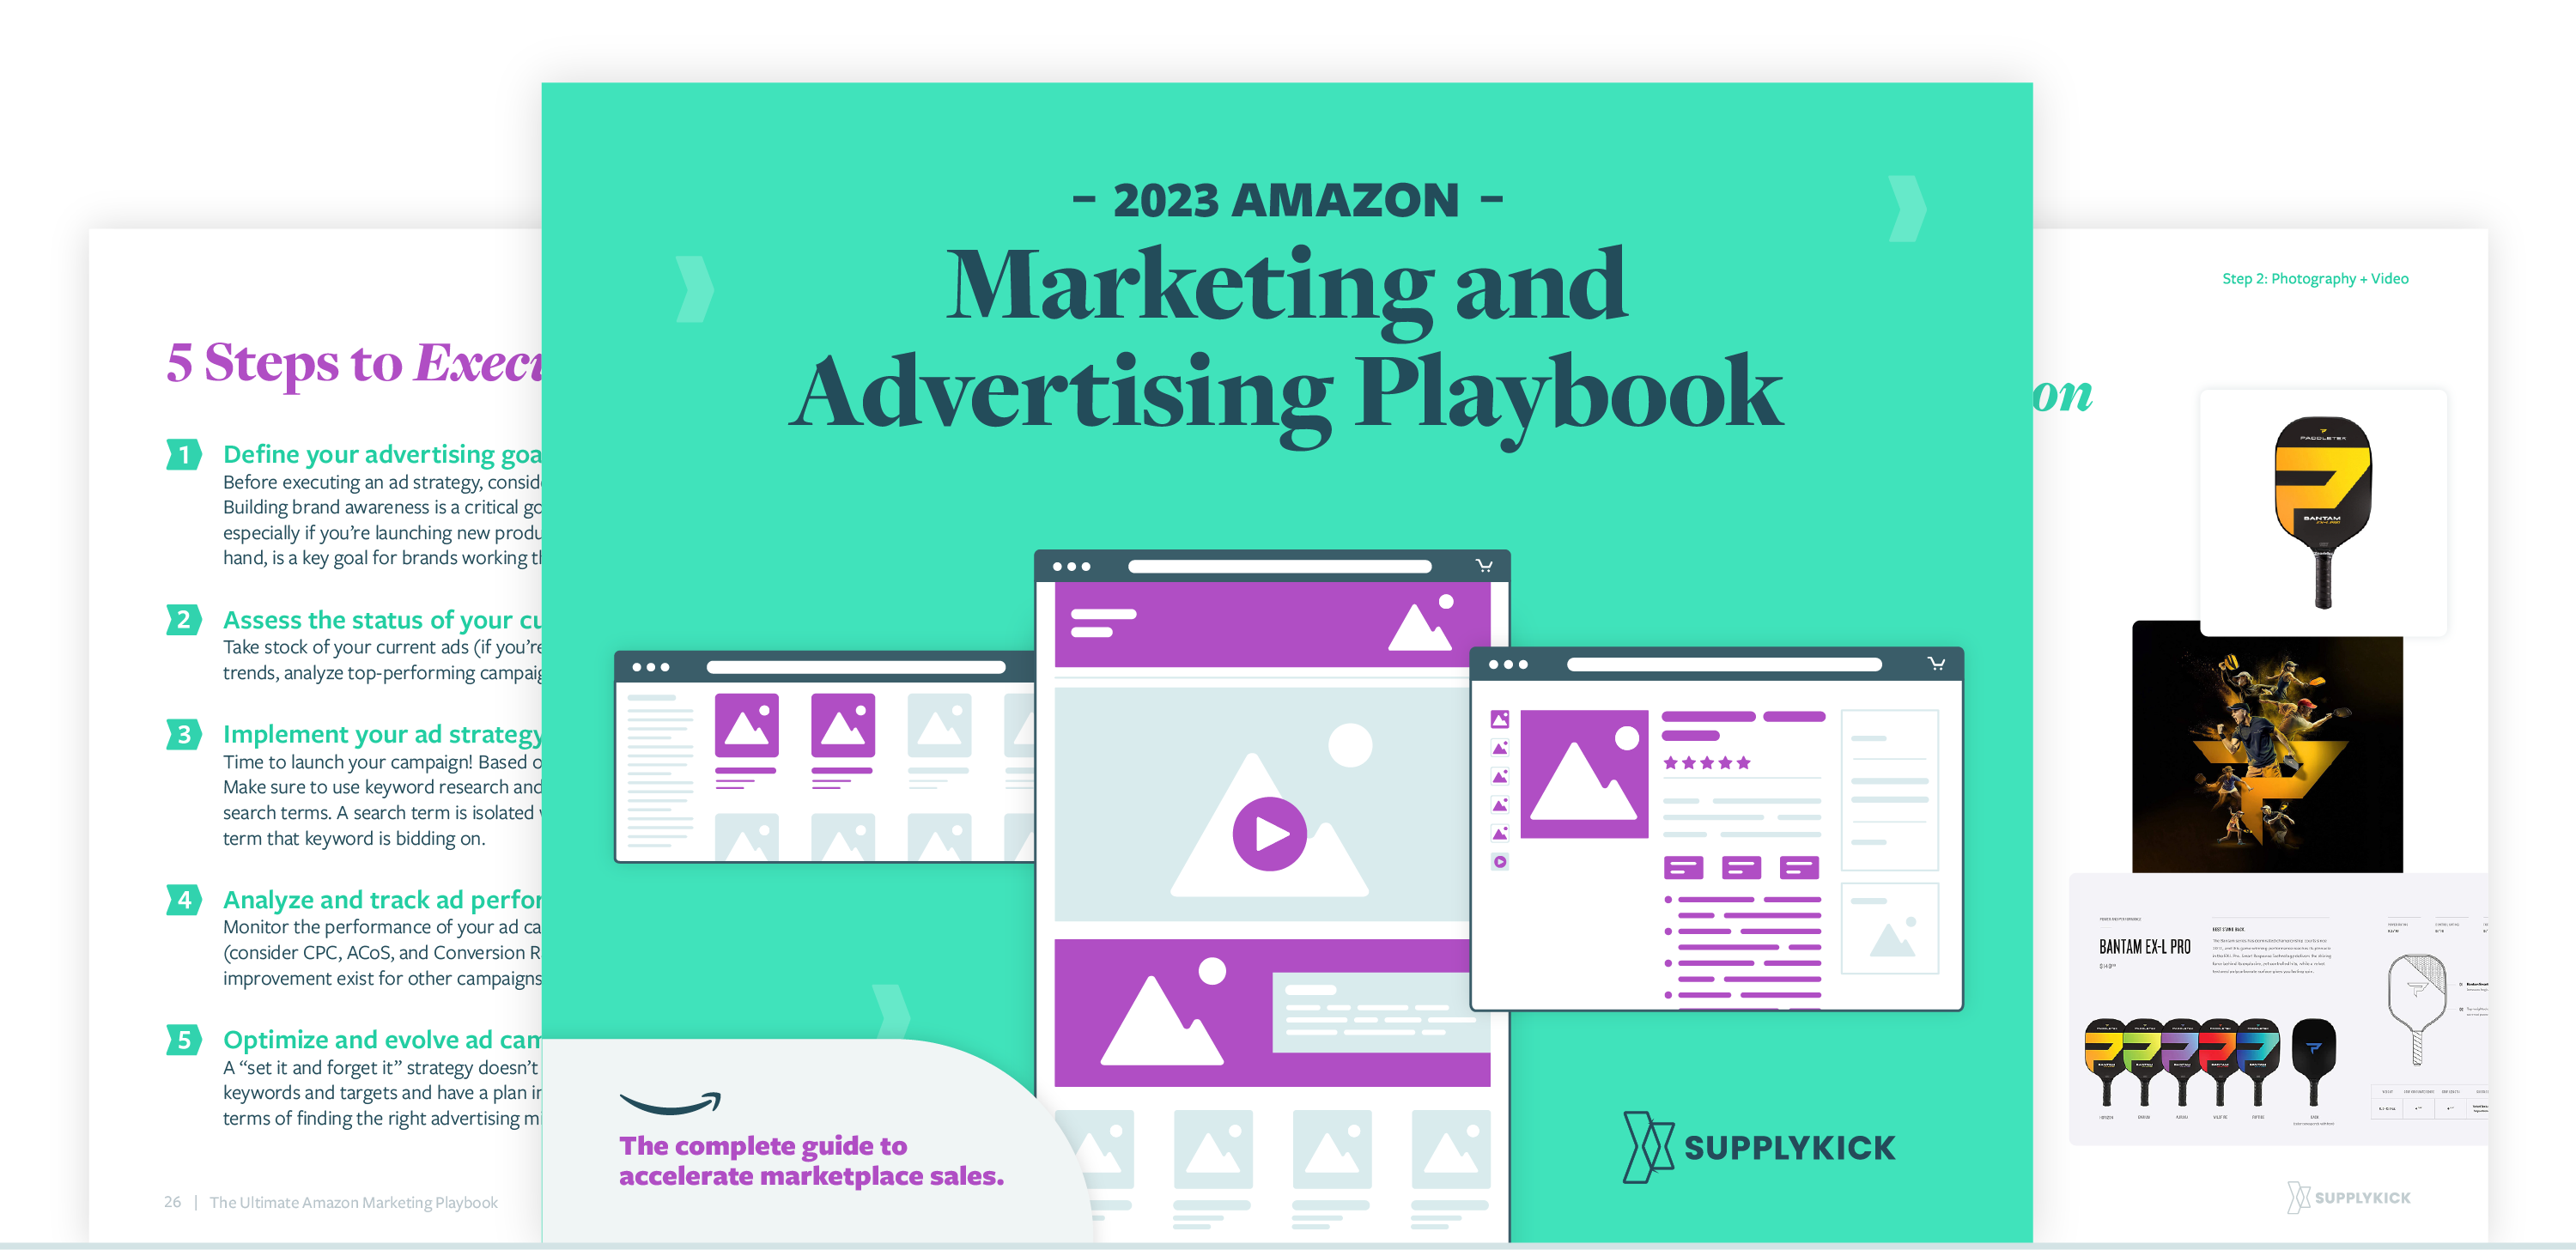 The Ultimate Amazon Marketing Playbook: 2022 Edition